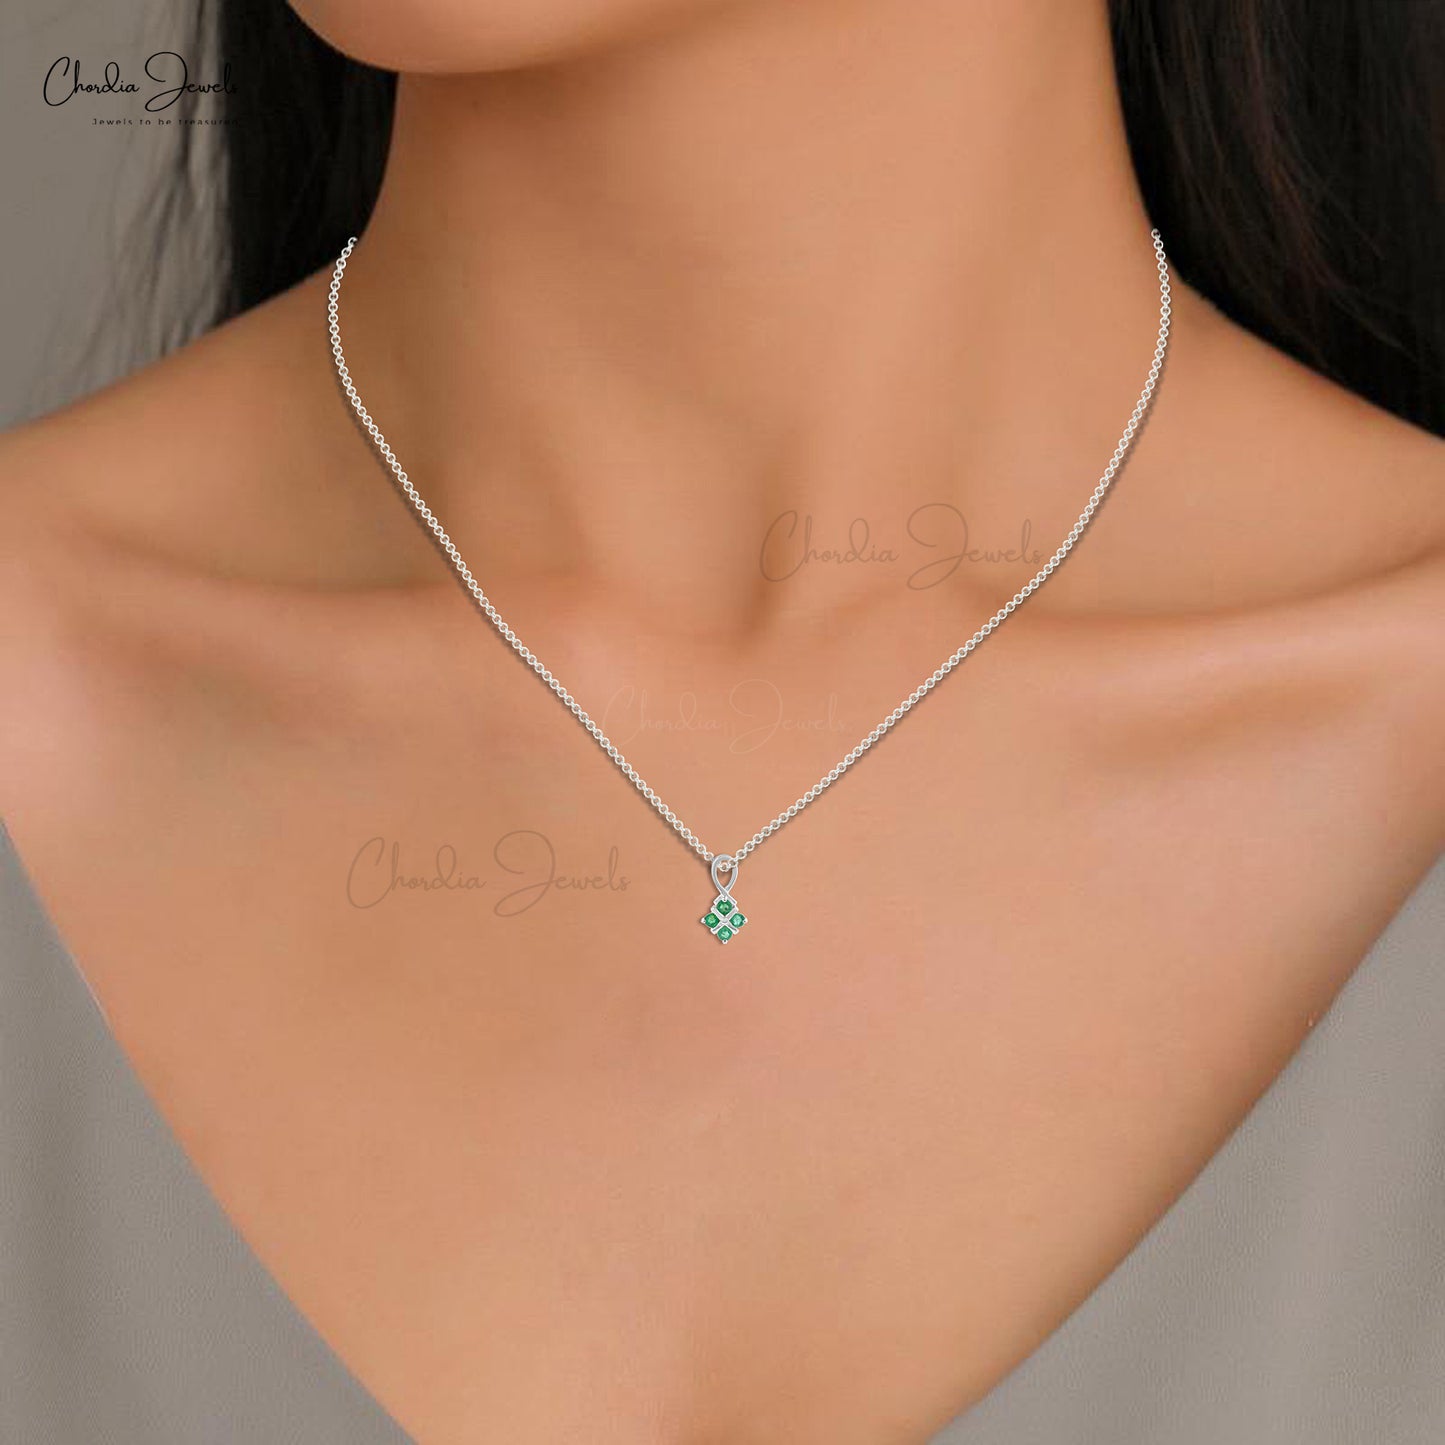 Load image into Gallery viewer, Twisted Pendant With Emerald Gemstone Solid 14k White Gold May Birthstone Unique Pendant
